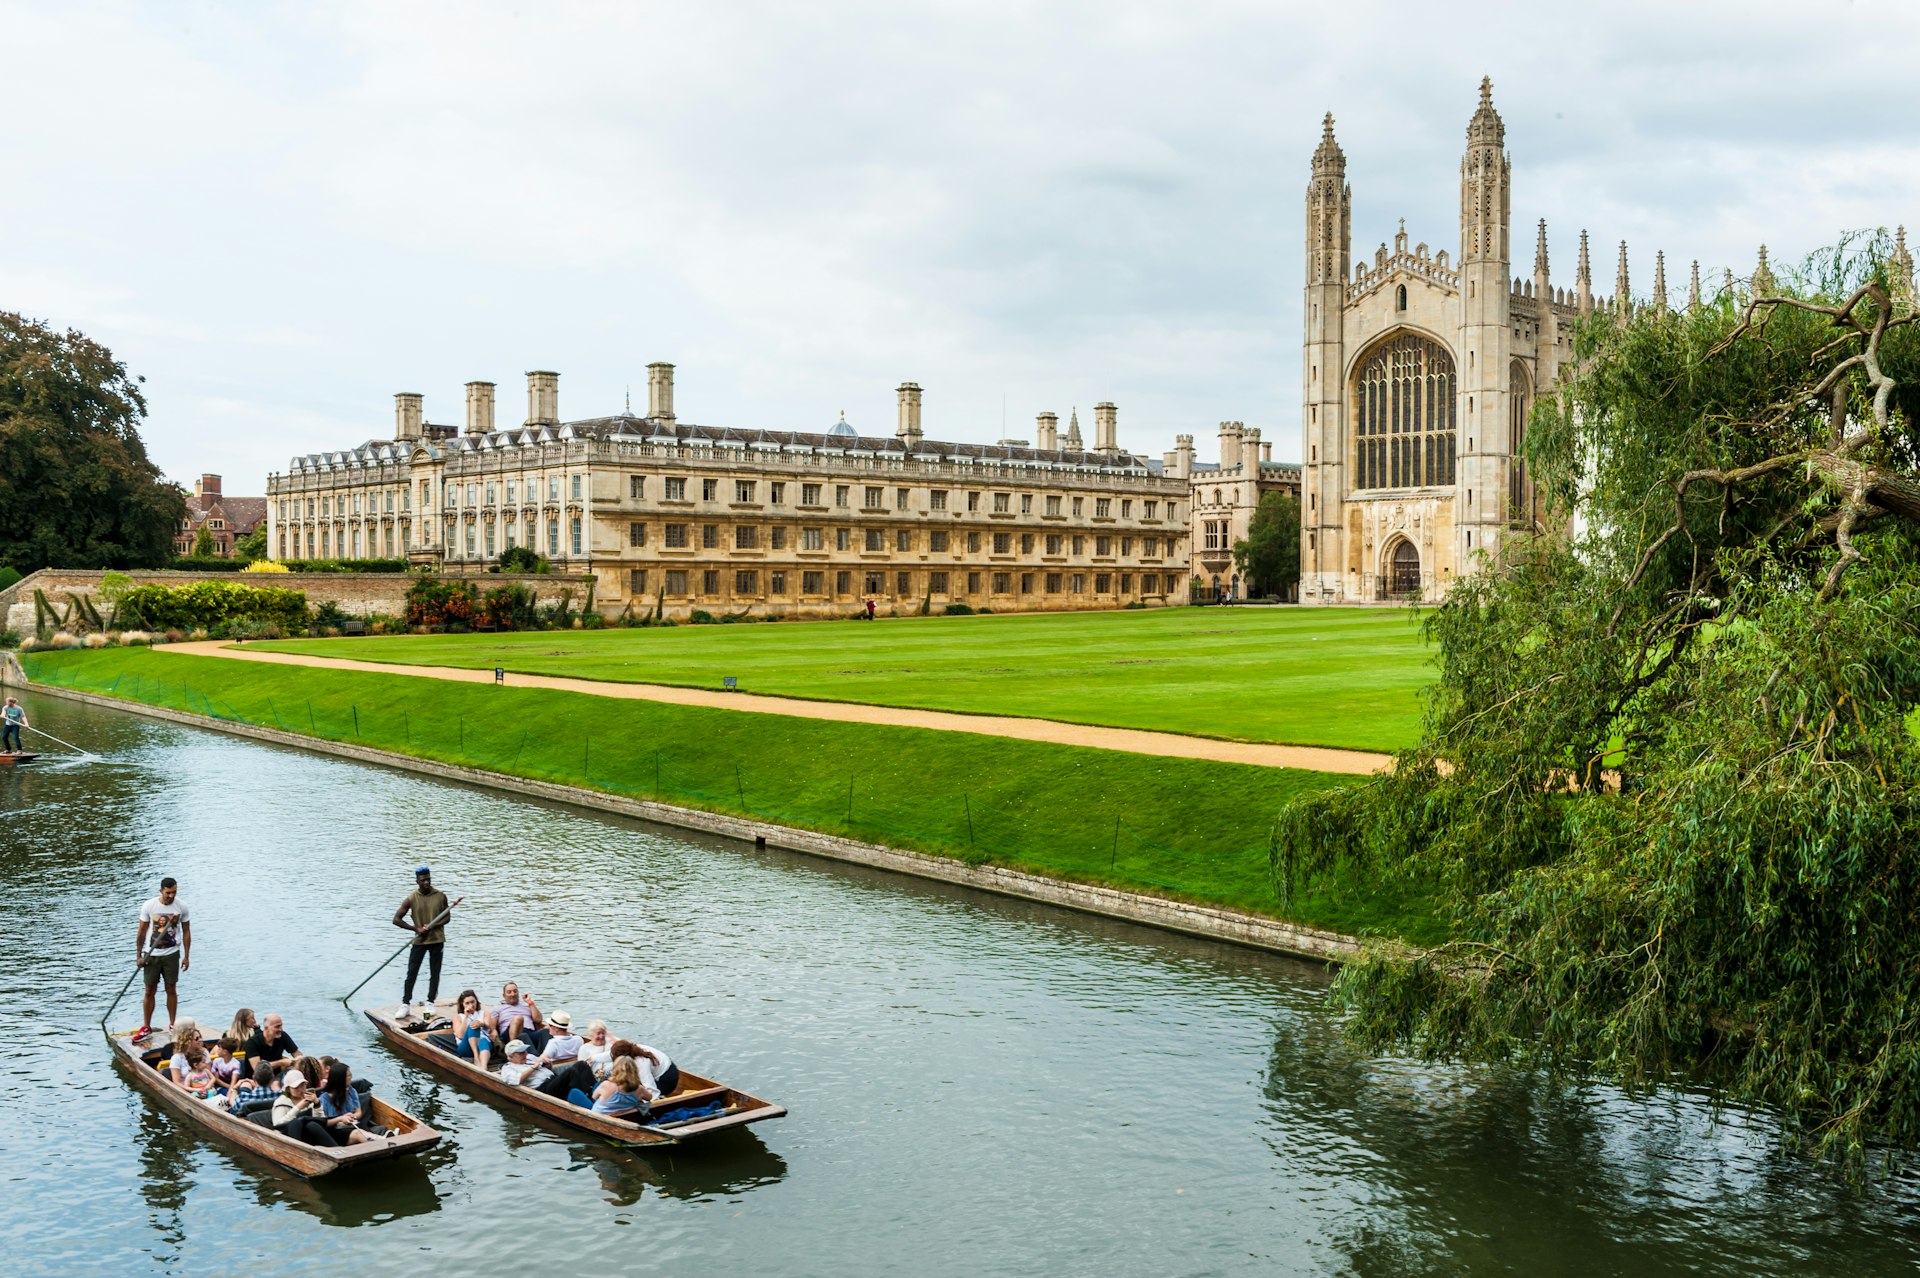 A view of King’s College and King’s College Chapel seen from The Backs, Cambridge, England, United Kingdom